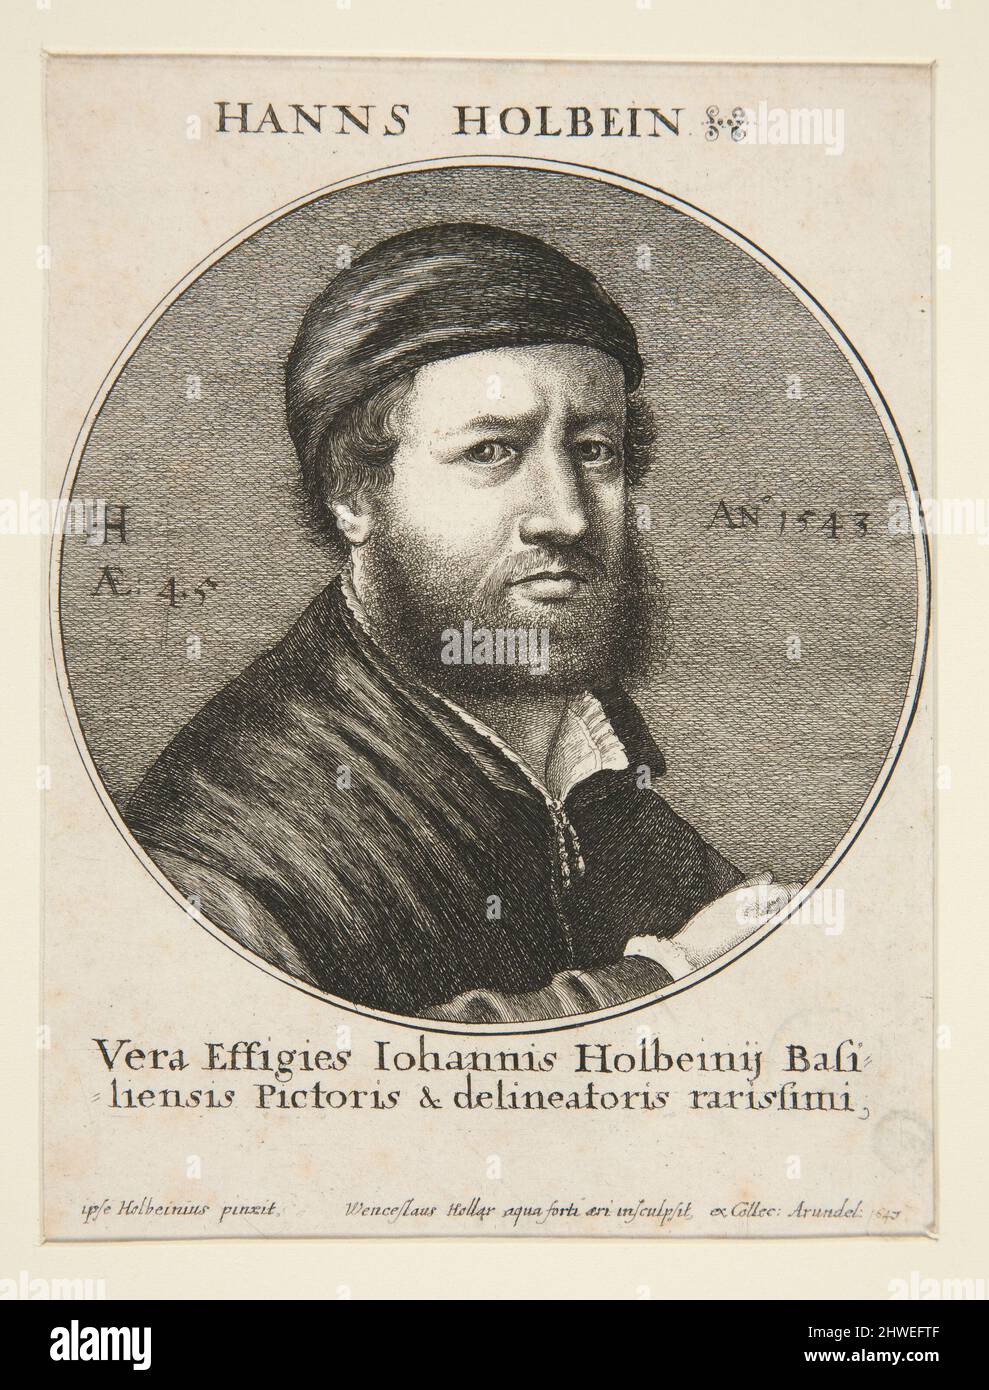 Hans Holbein il più giovane. Artista: Wenceslaus Hollar, Boemia, 1607–1677After: Hans Holbein the Younger, tedesco, 1497/98–1543 Foto Stock